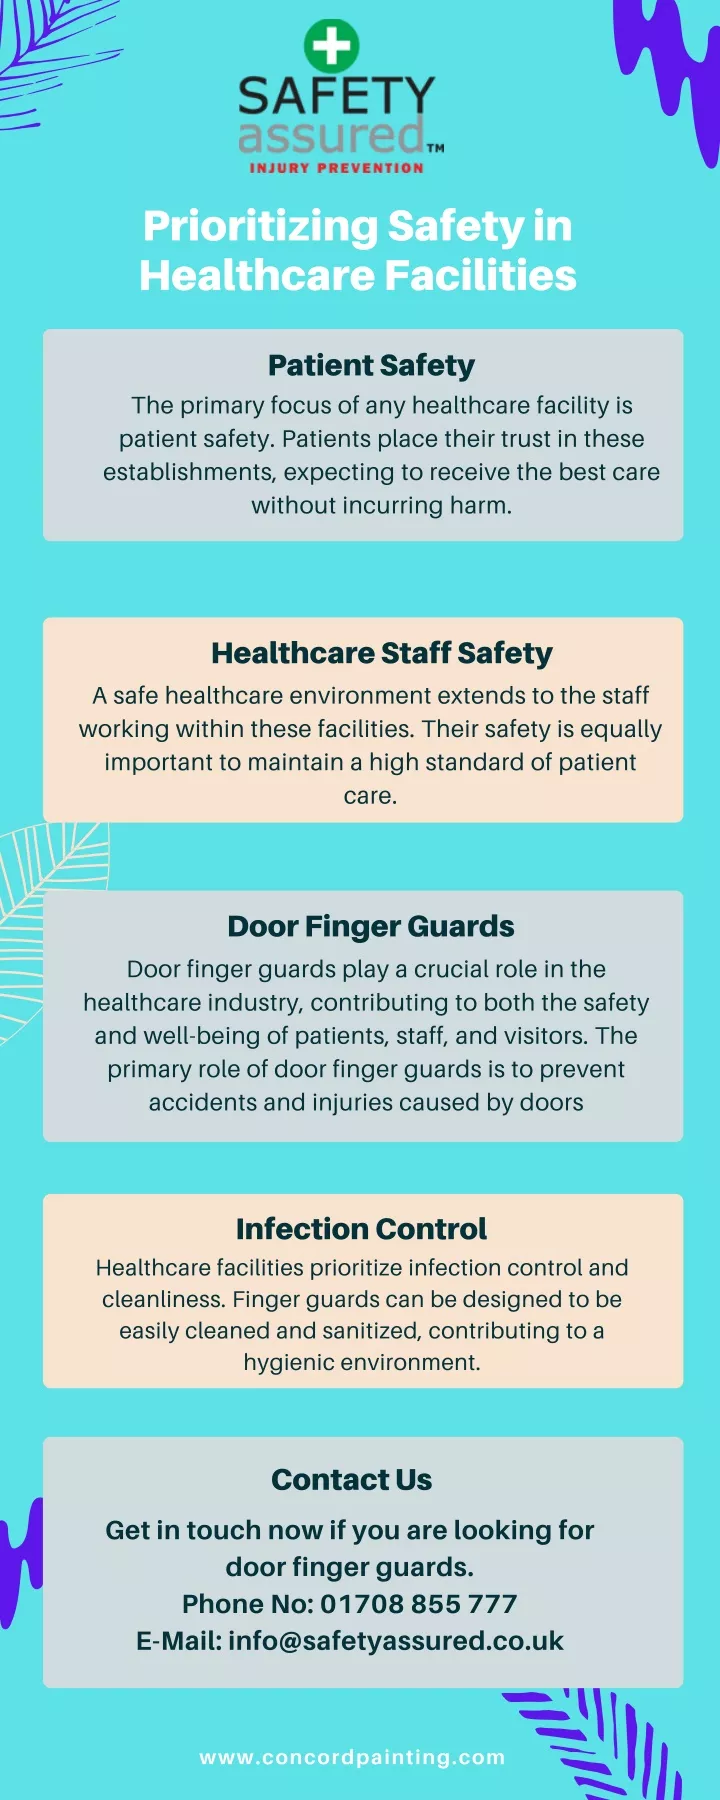 prioritizing safety in healthcare facilities